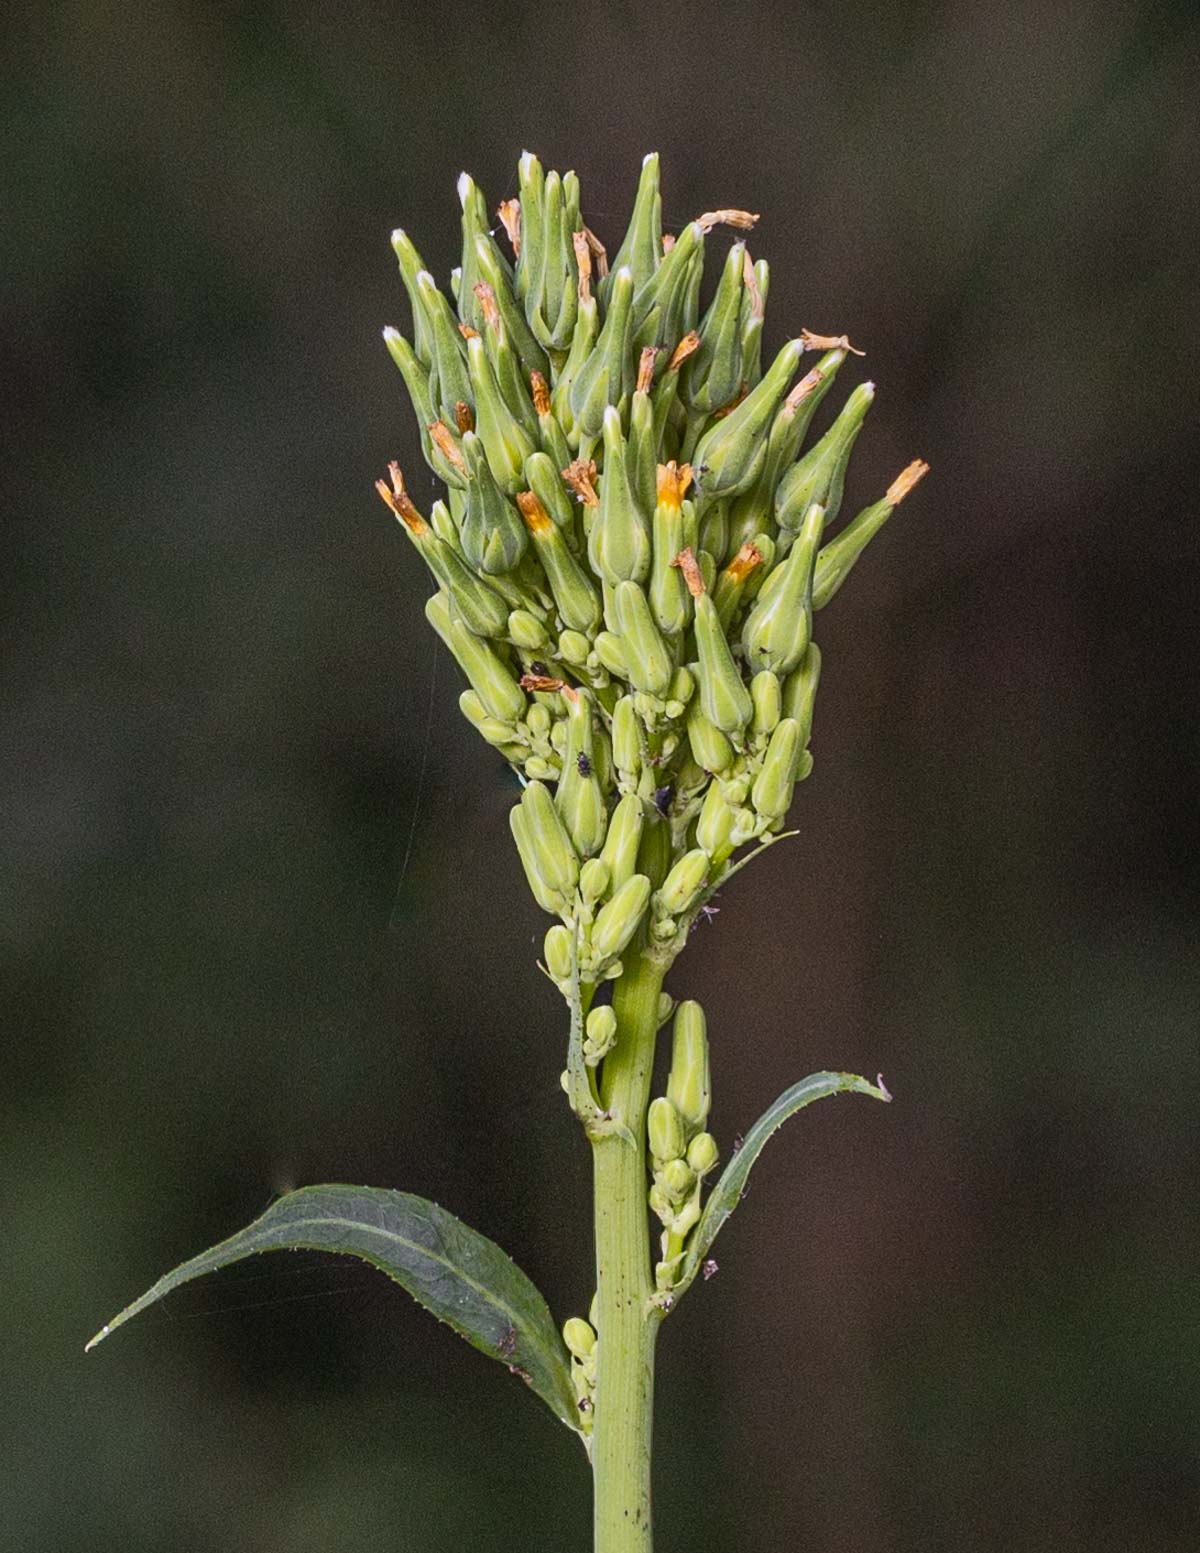 Close up image of a Canadian wild lettuce (L. canadensis) flower panicle before branching out.